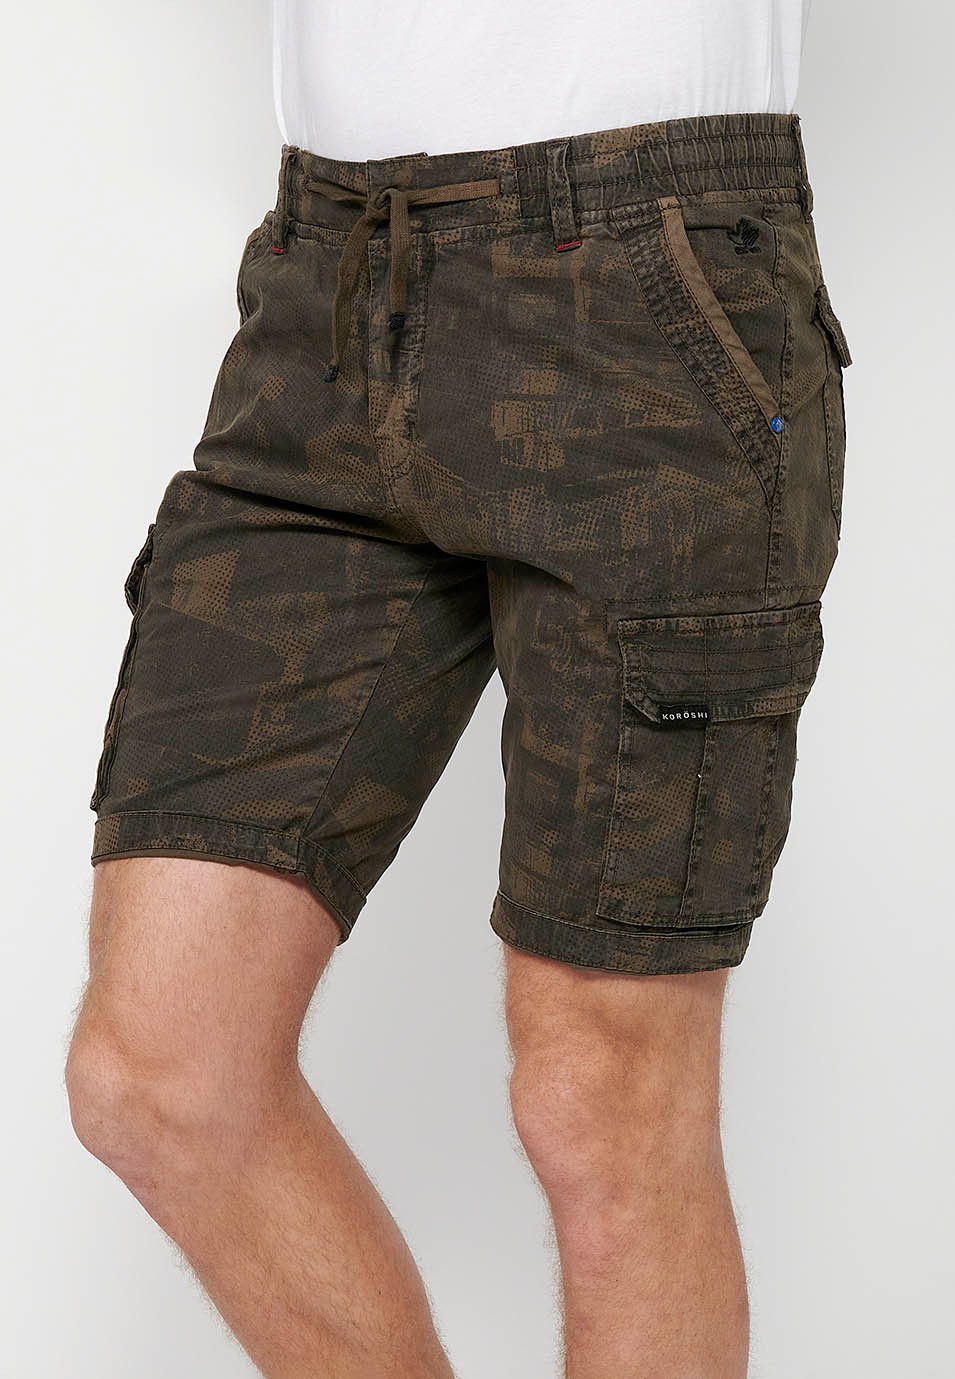 Cargo shorts with front closure with zipper and button and four pockets, two rear pockets with flap with two cargo pockets with flap and adjustable waist with drawstring in Khaki color for men 5